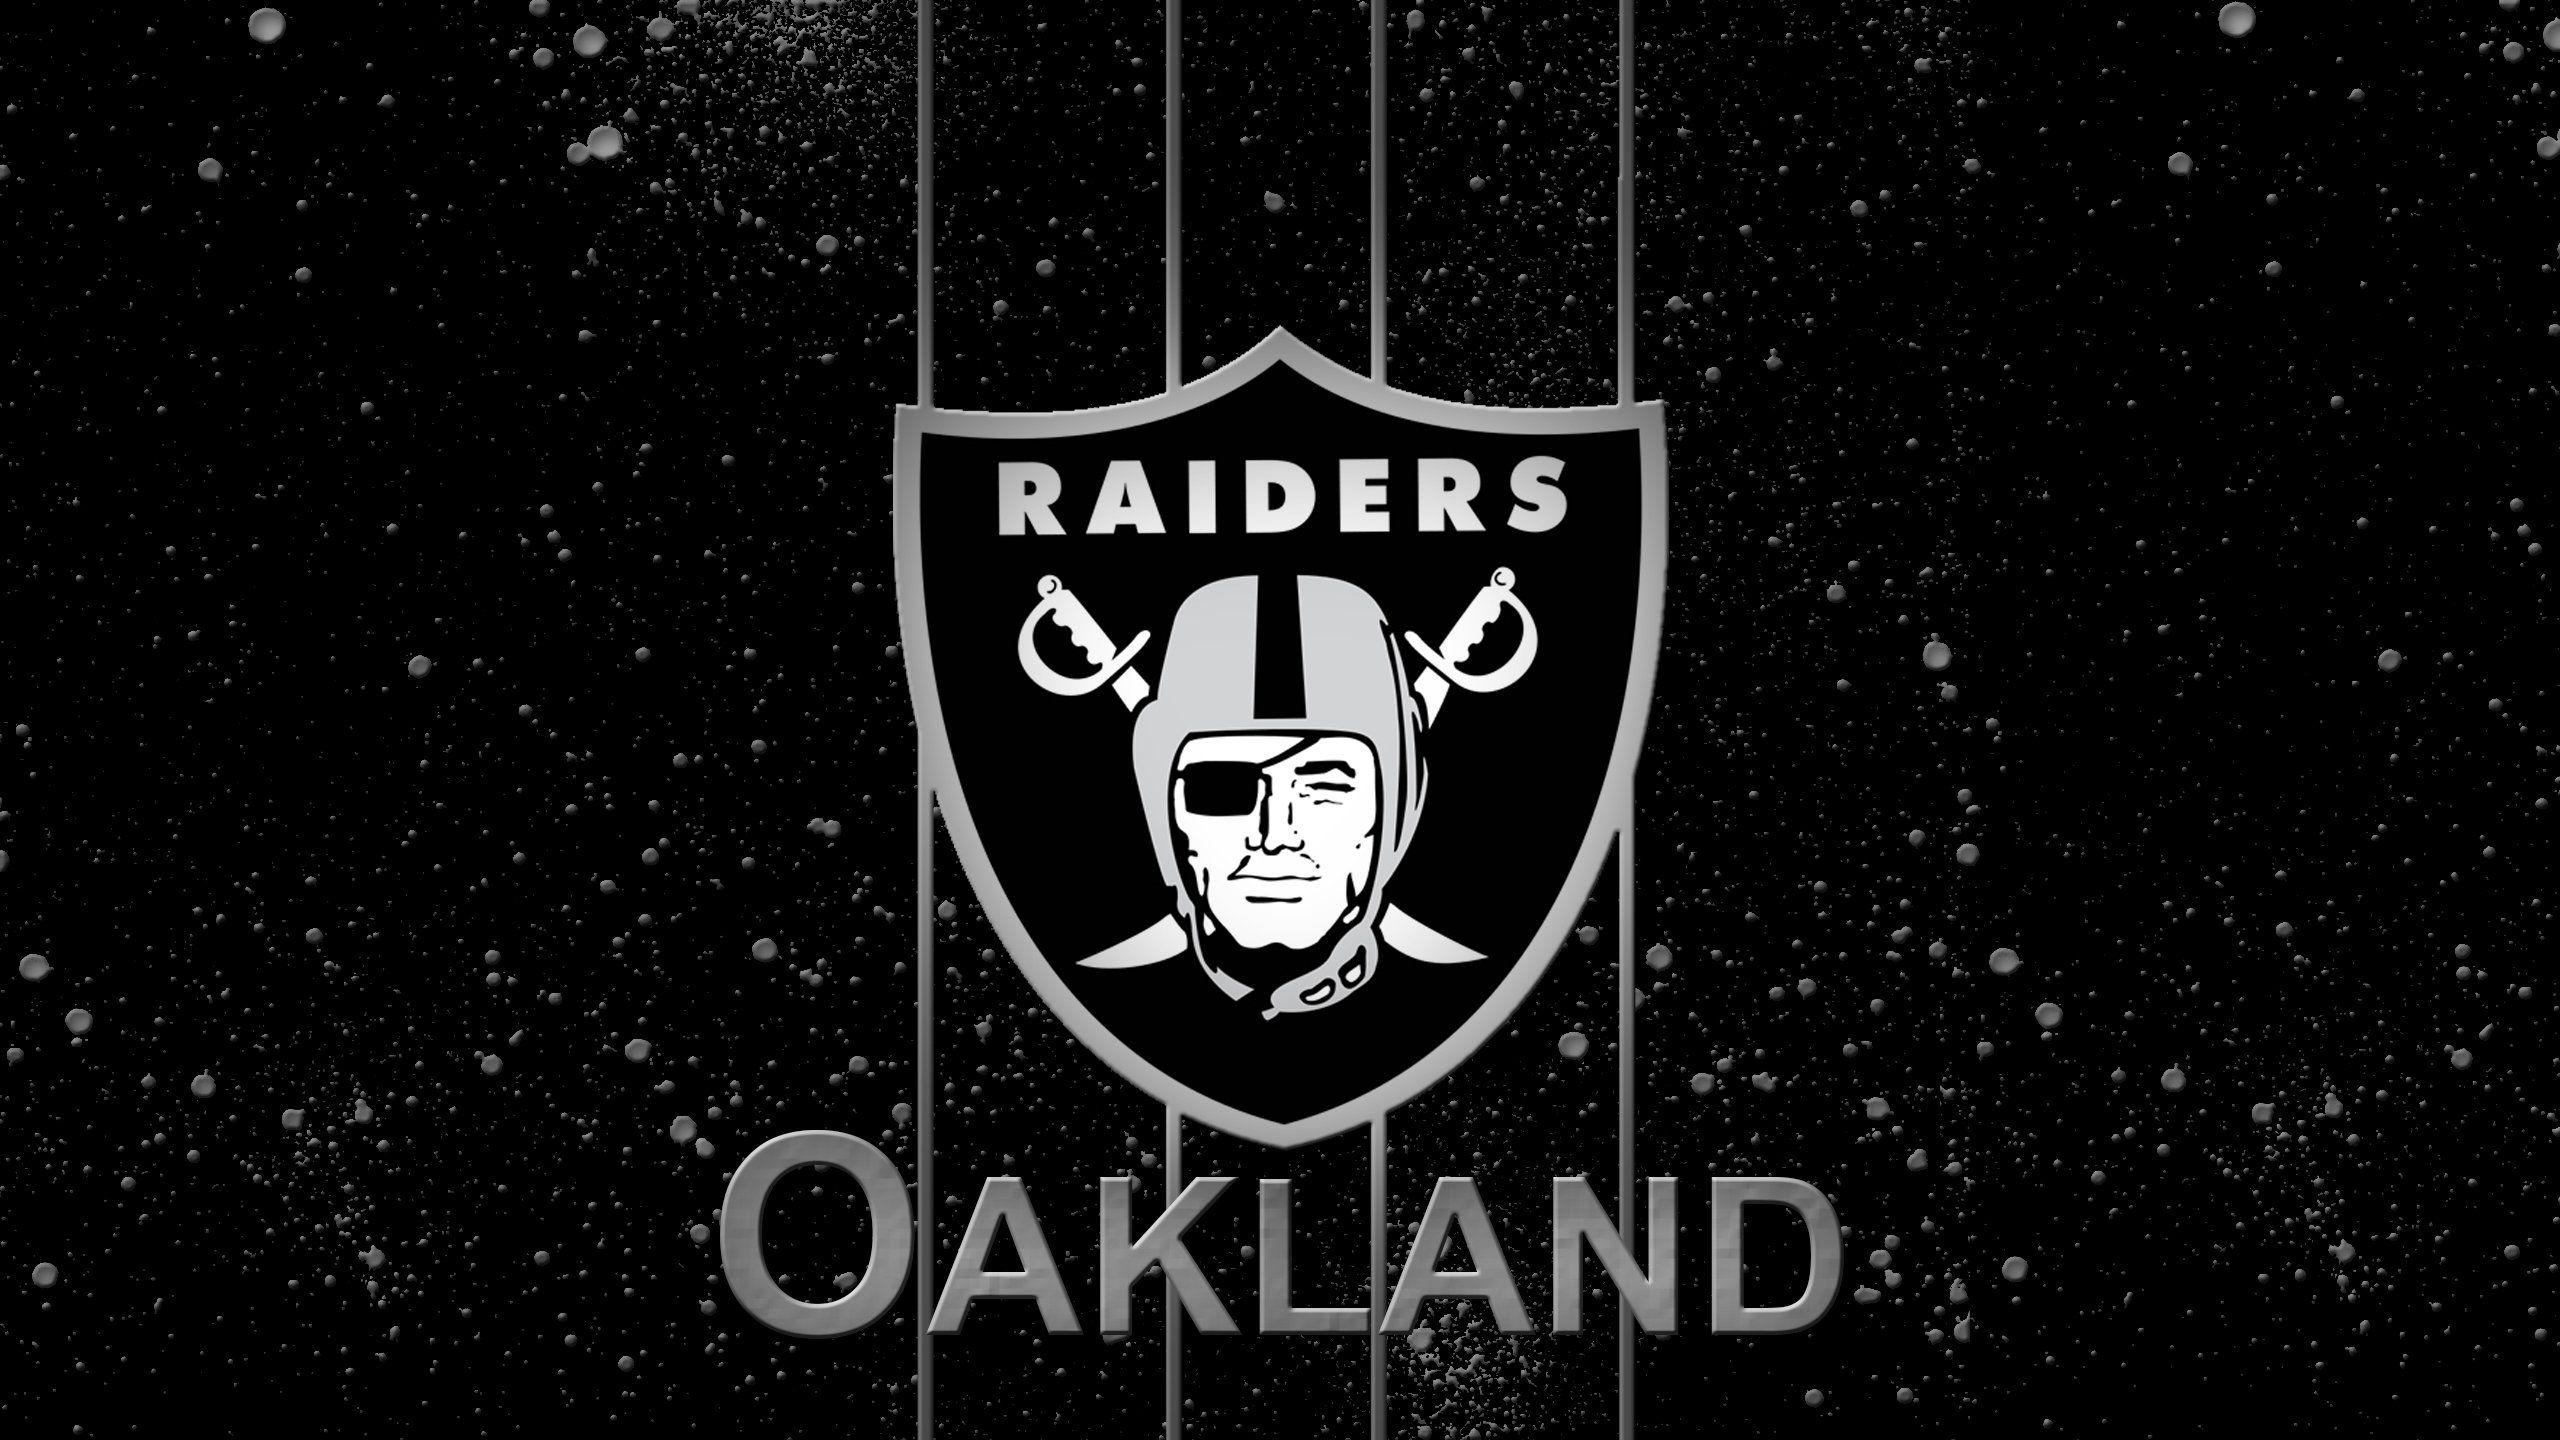 Download Raiders Wallpaper by Fcmaci  7b  Free on ZEDGE now Browse  millions of popular r  Raiders wallpaper Oakland raiders wallpapers Oakland  raiders funny